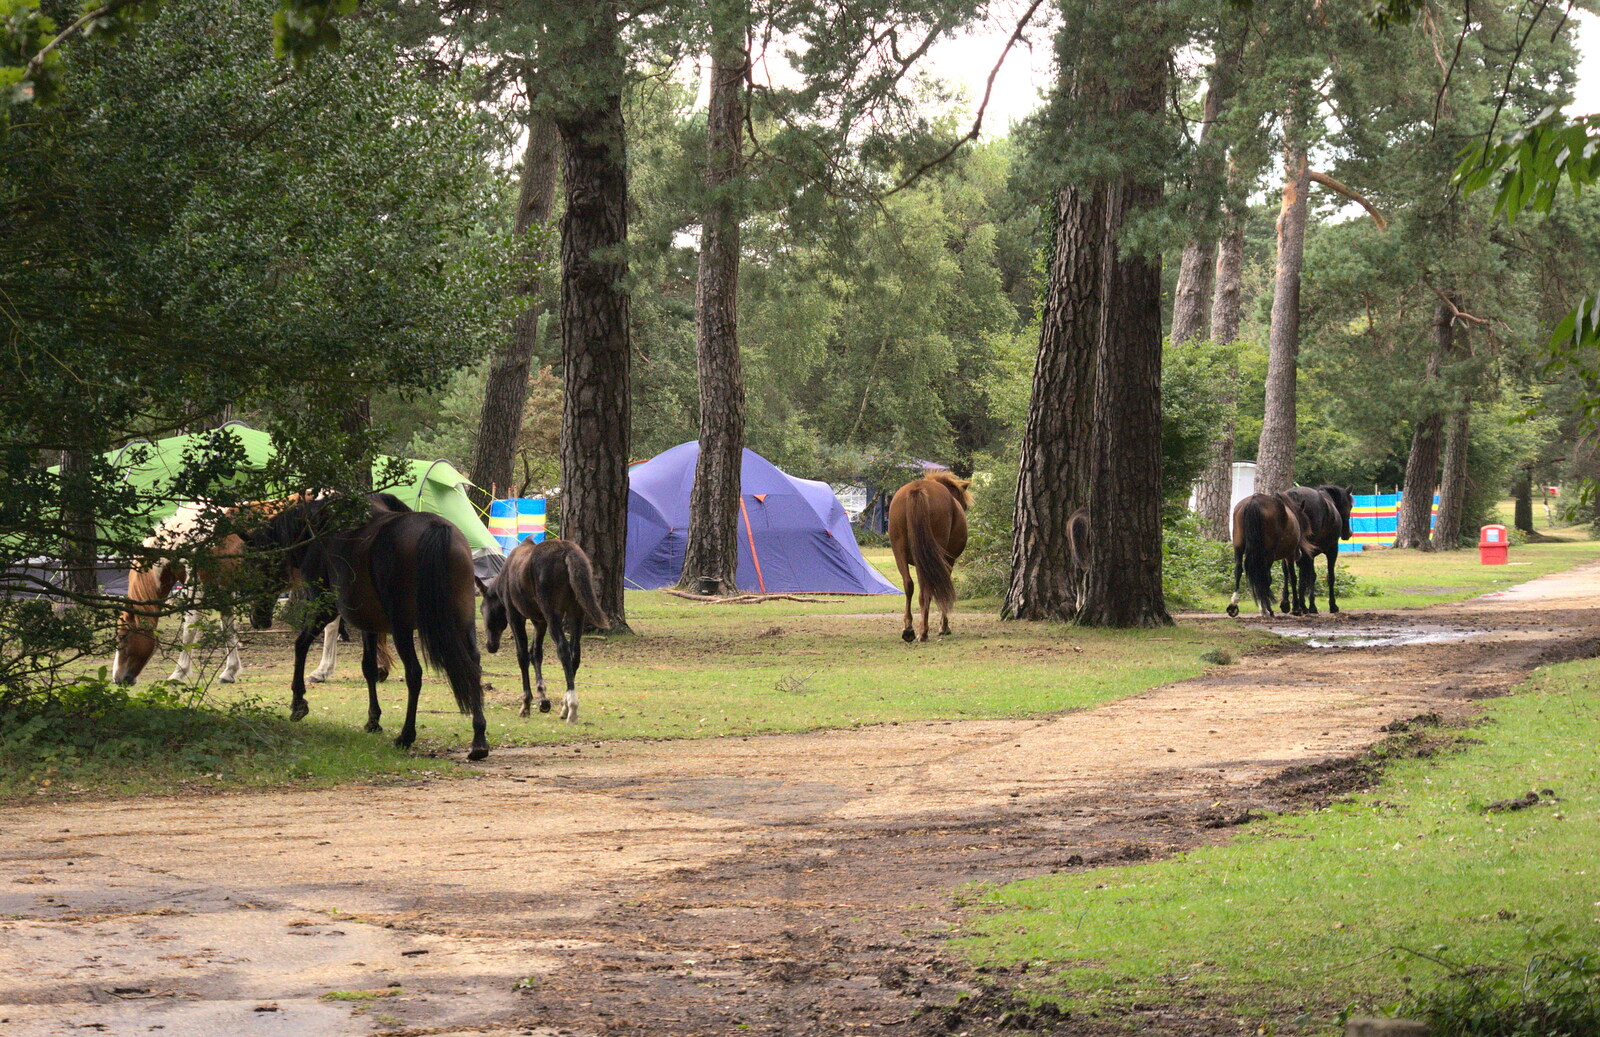 The ponies disperse through the campsite from Camping at Roundhills, Brockenhurst, New Forest, Hampshire - 29th August 2015